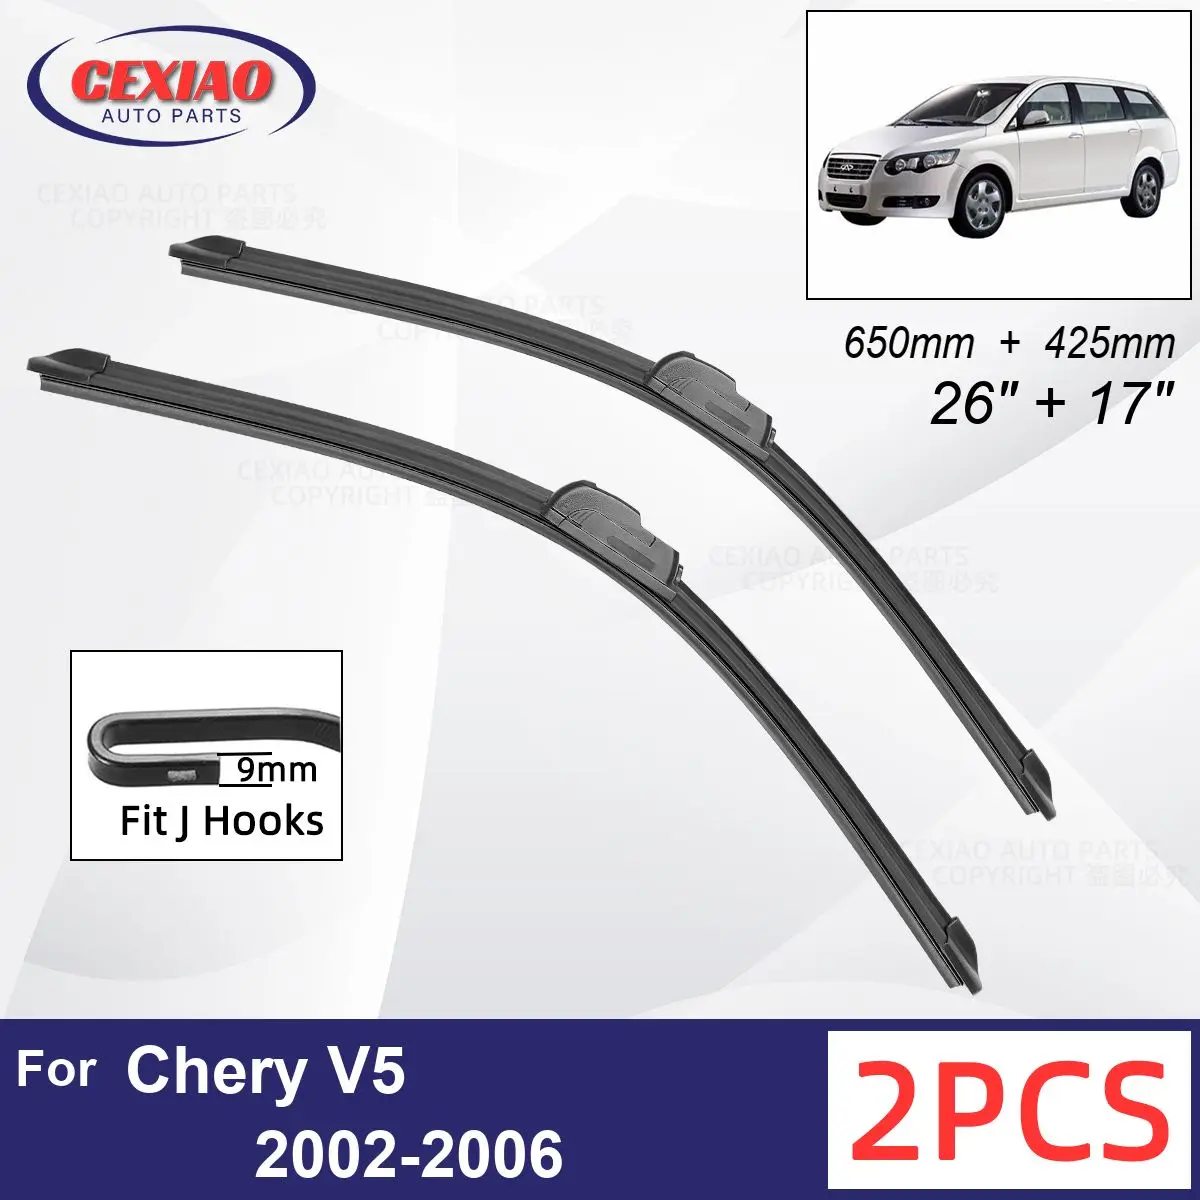 

Car Wiper For Chery V5 2002-2006 Front Wiper Blades Soft Rubber Windscreen Wipers Auto Windshield 26" + 17" 650mm + 425mm